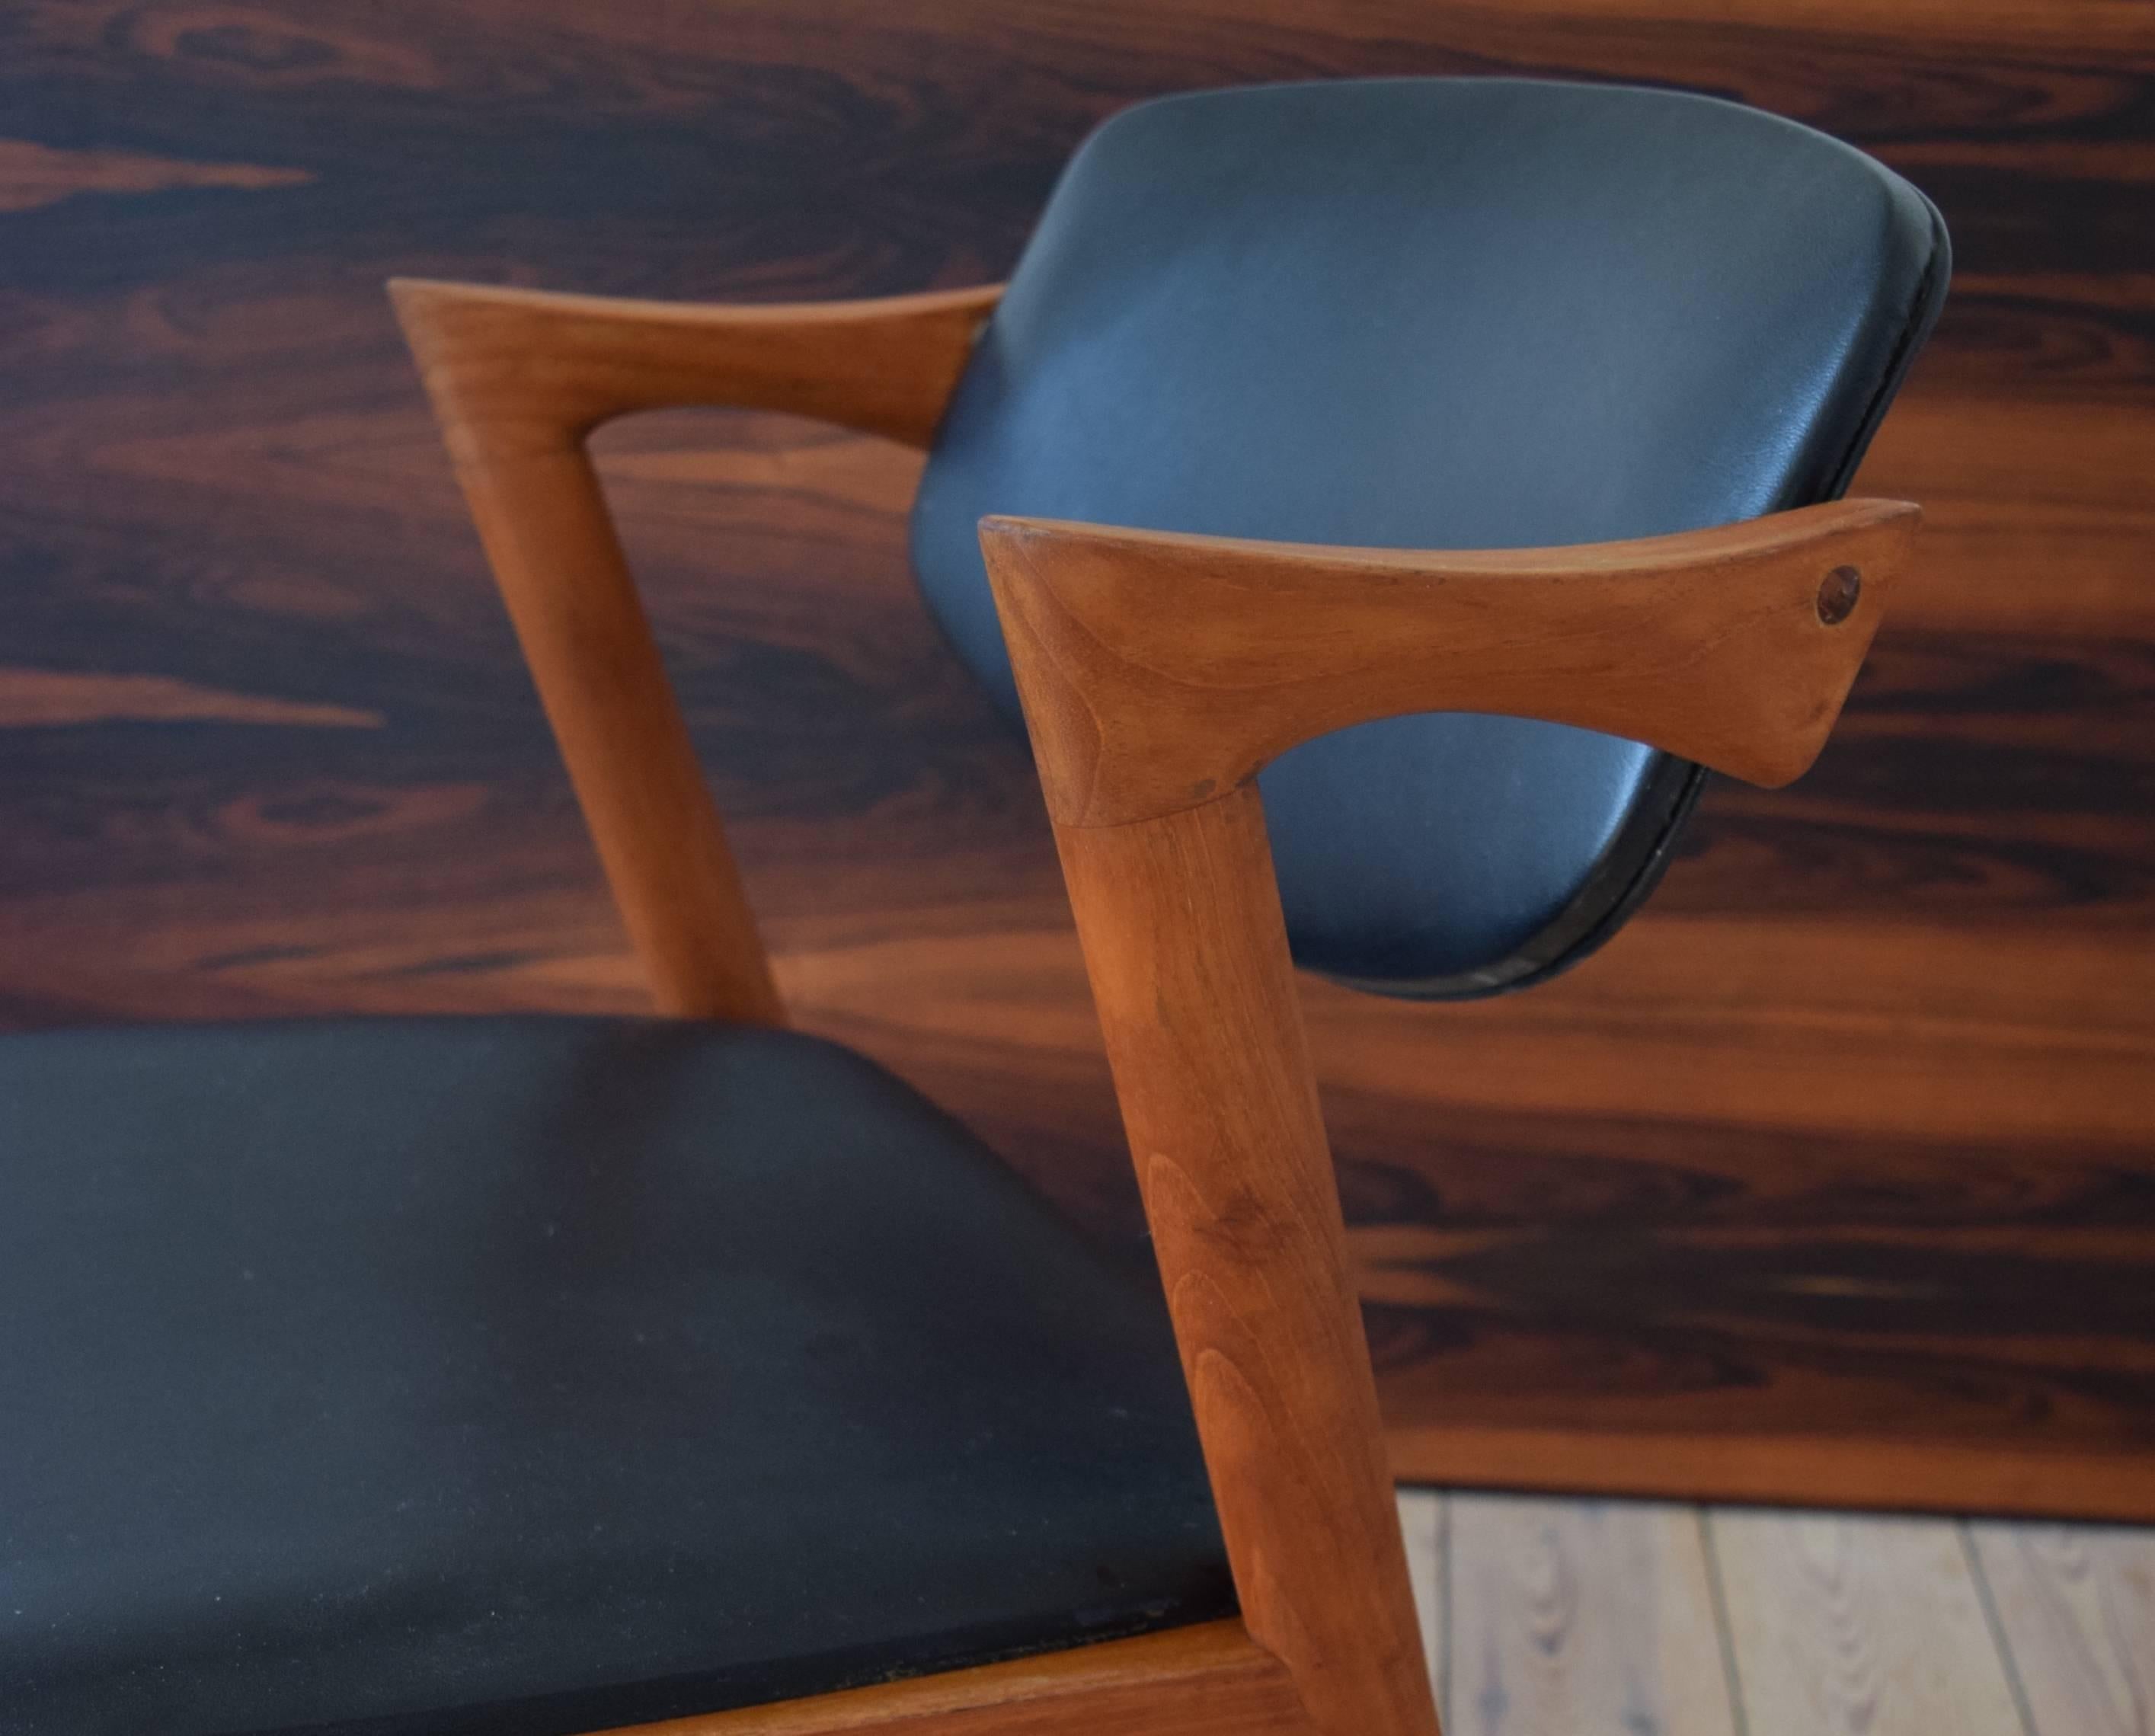 Kai Kristiansen model 42 teak dining chair, manufactured by Schou Andersen in the 1960s. This chair is covered in black skai. Chair frame has been re-finished, cleaned and oiled. Some small marks here and there commensurate with age, but overall